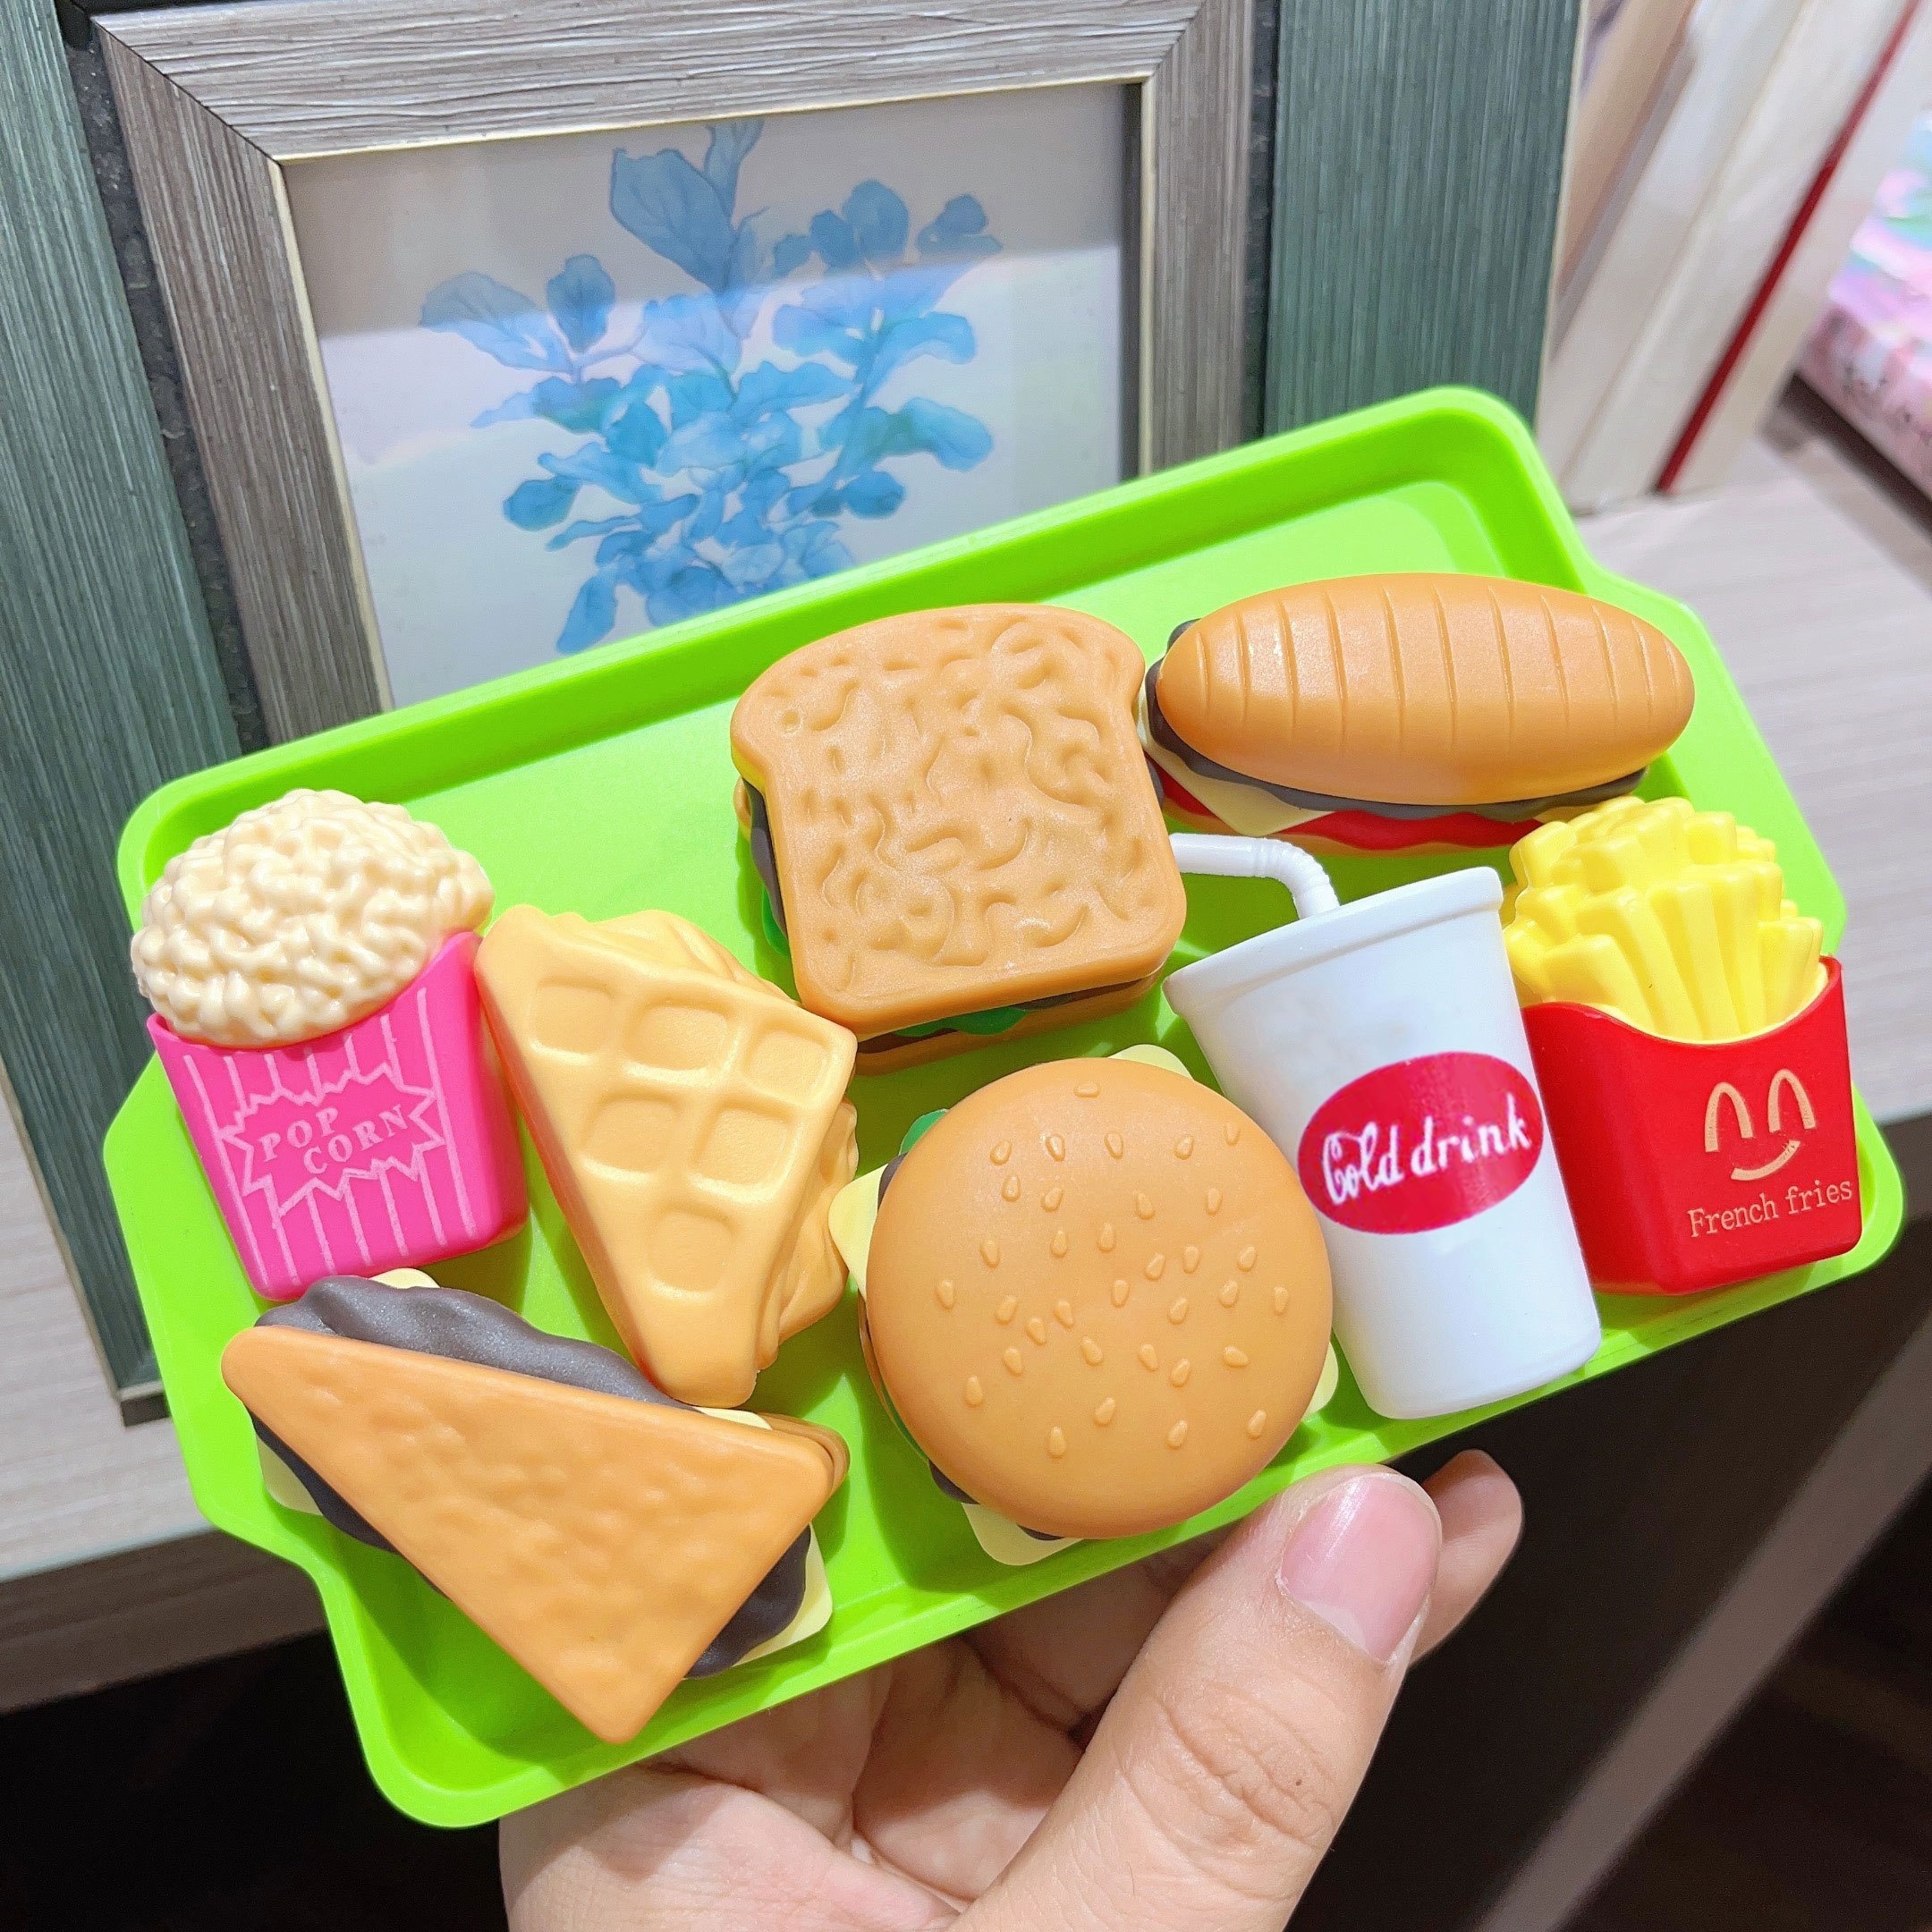 

9pcs Children's Play House Hamburger Package Toys Mini French Fries Kitchen Set Breakfast Simulation Food Model